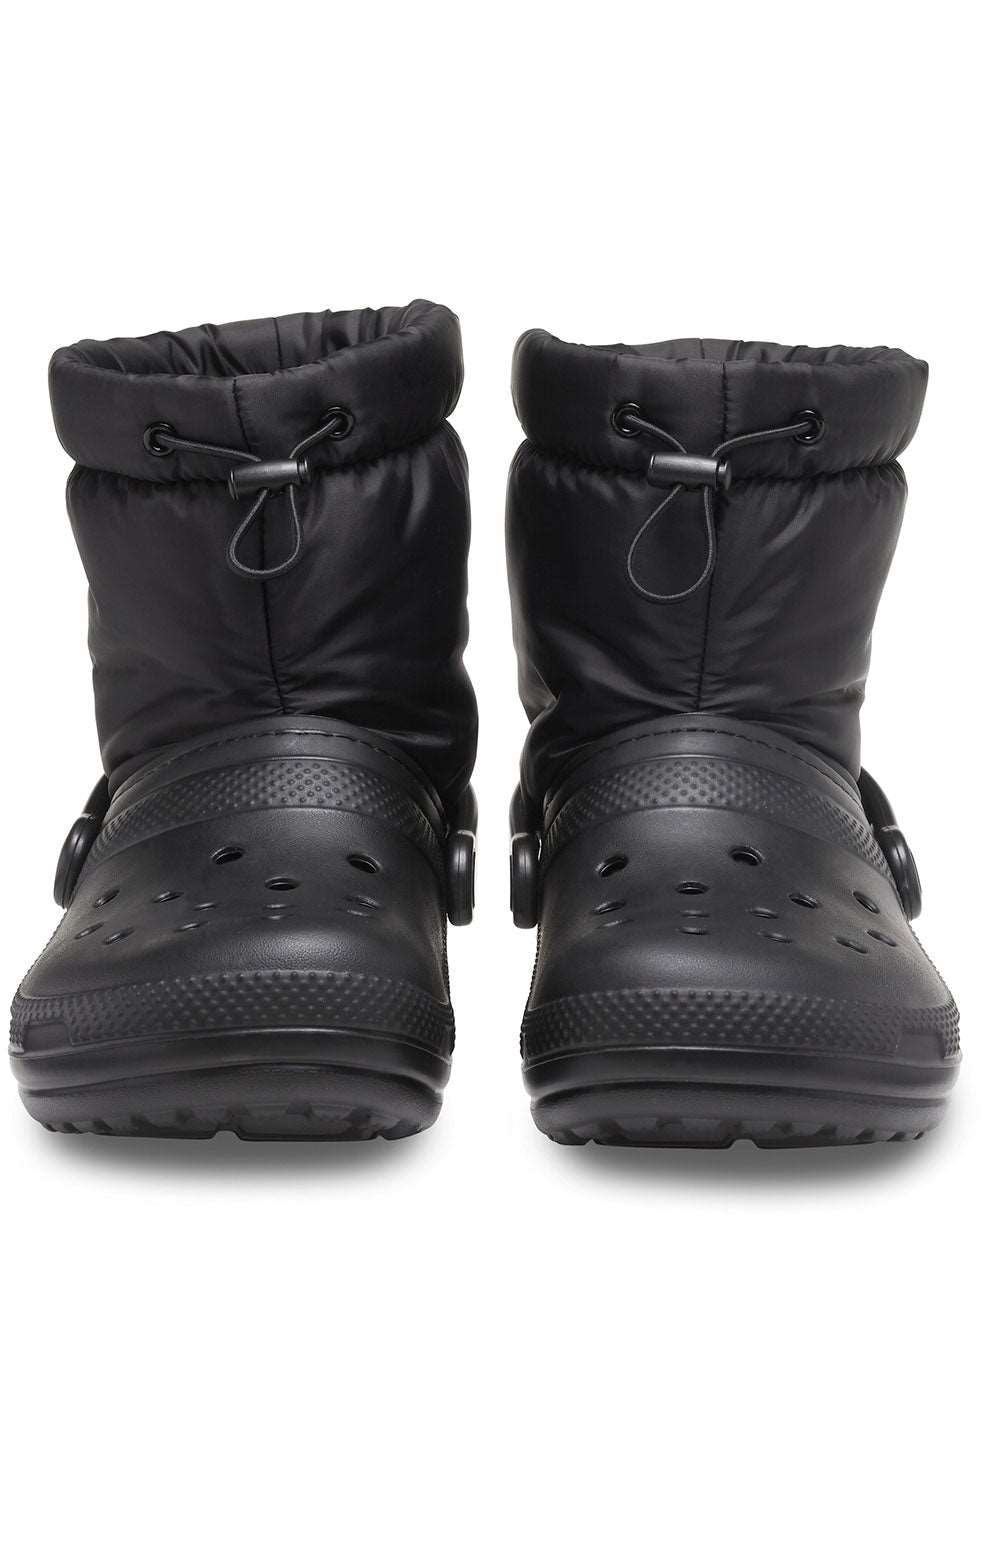 Classic Lined Neo Puff Boots - Black/Black